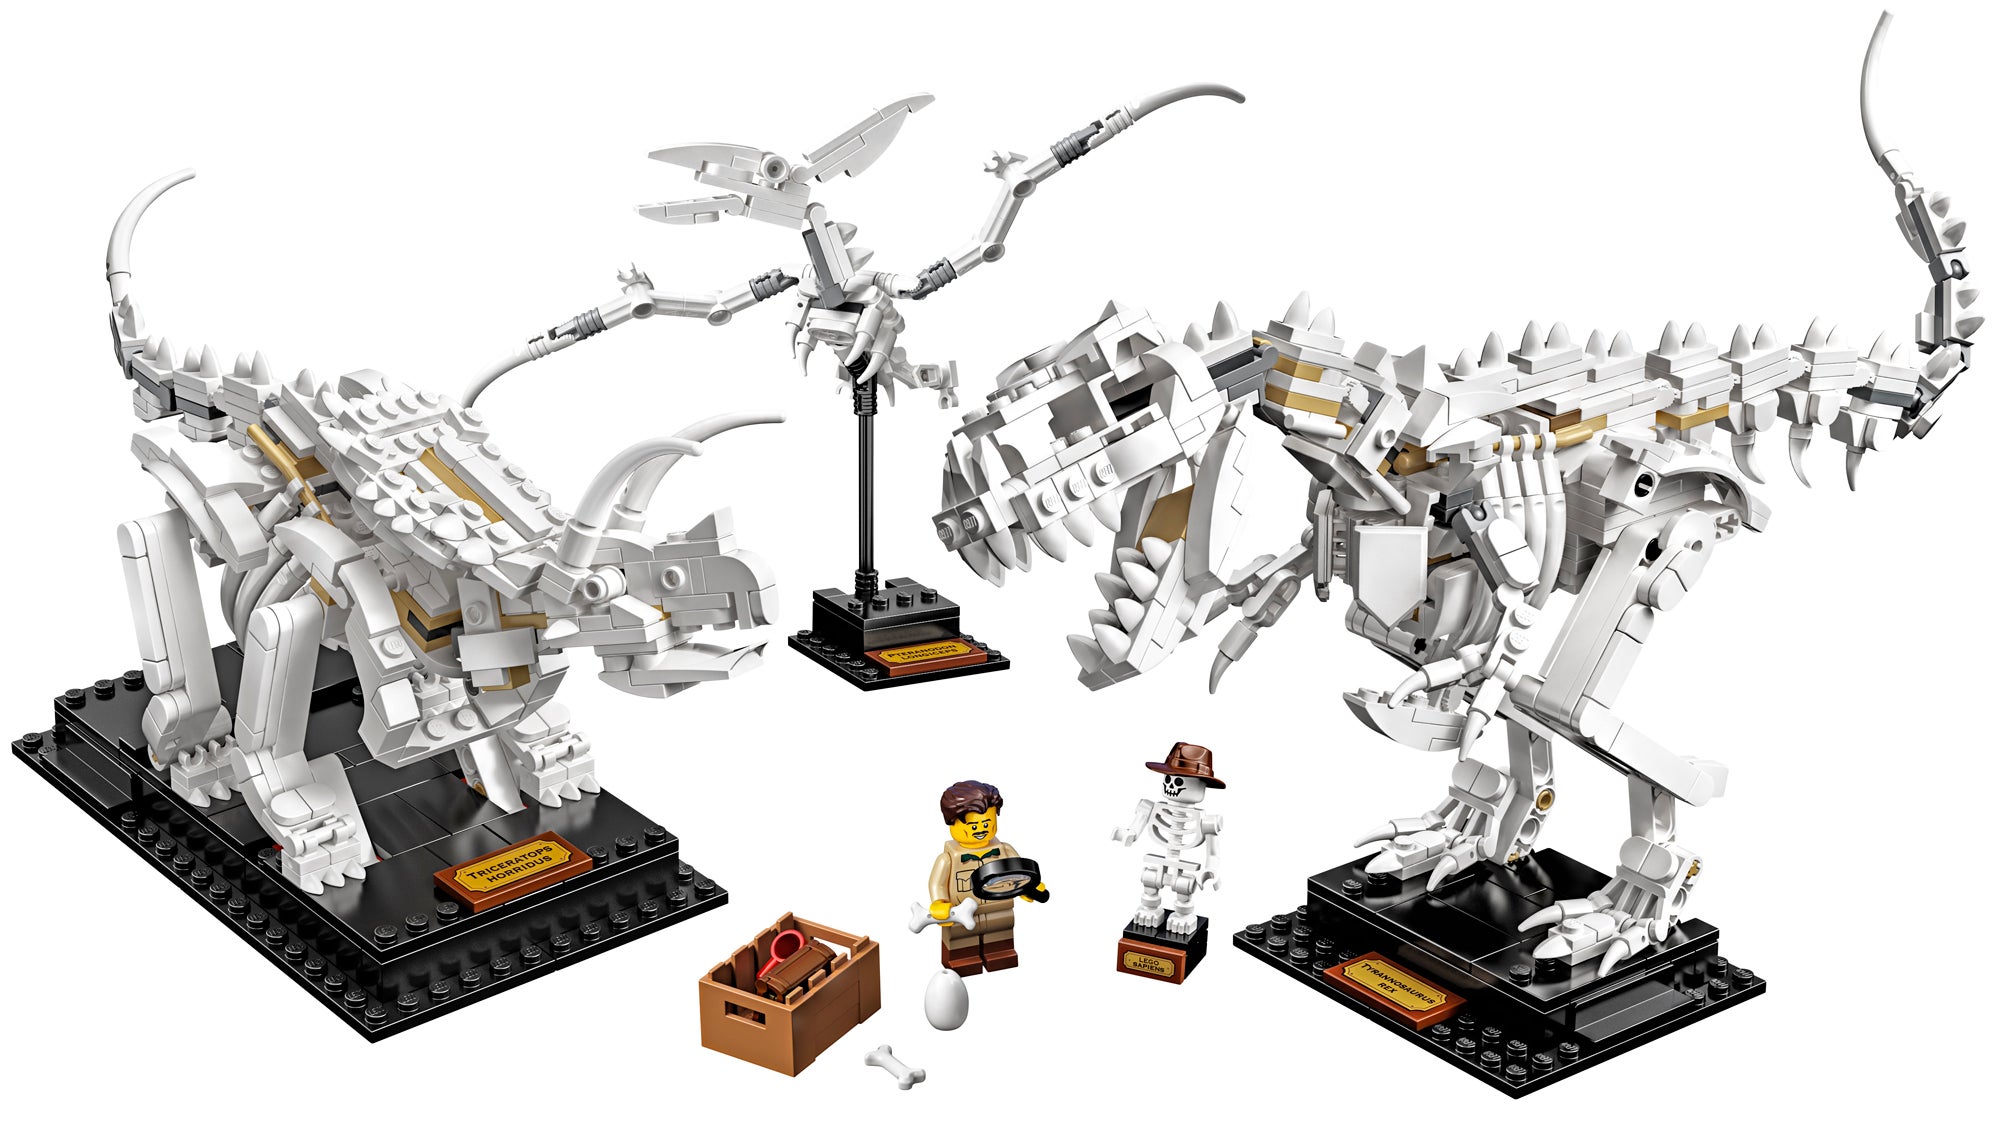 Lego’s New Dinosaur Fossils Turn Your Desk Into A Miniature Natural History Museum